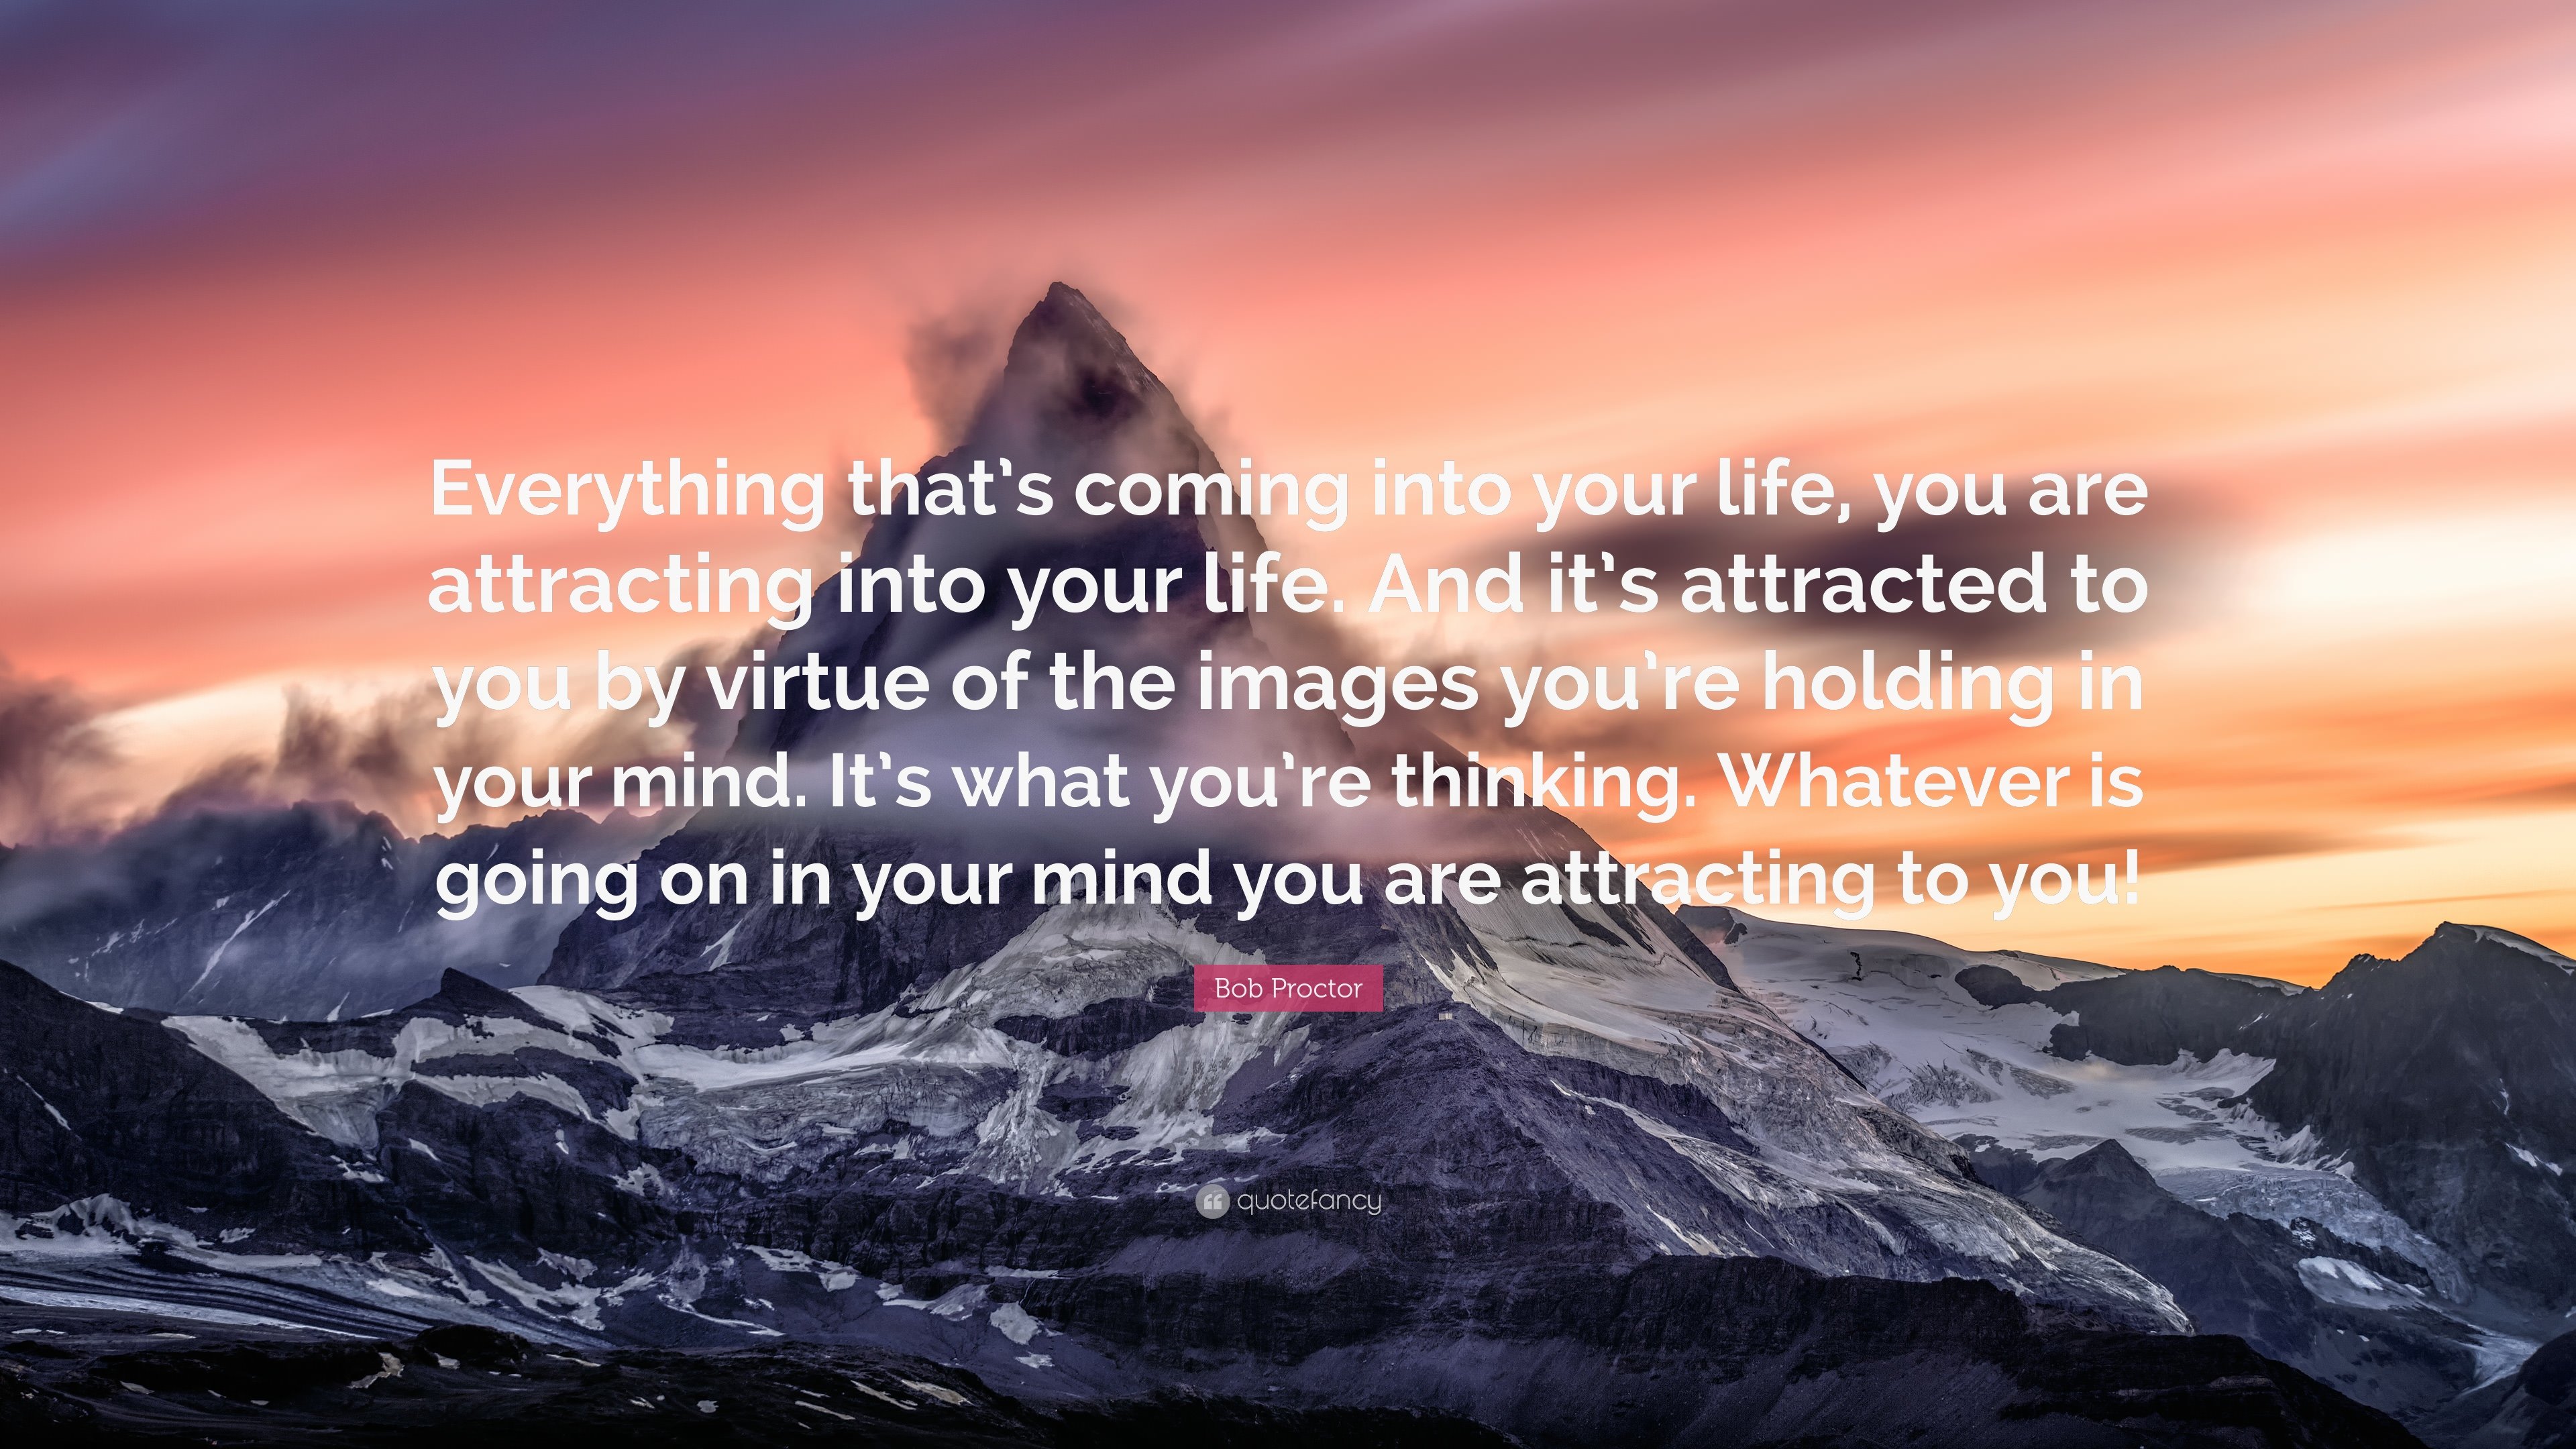 Bob Proctor Quote: “Everything that's coming into your life, you are attracting into your life. And it's attracted to you by virtue of the i.”